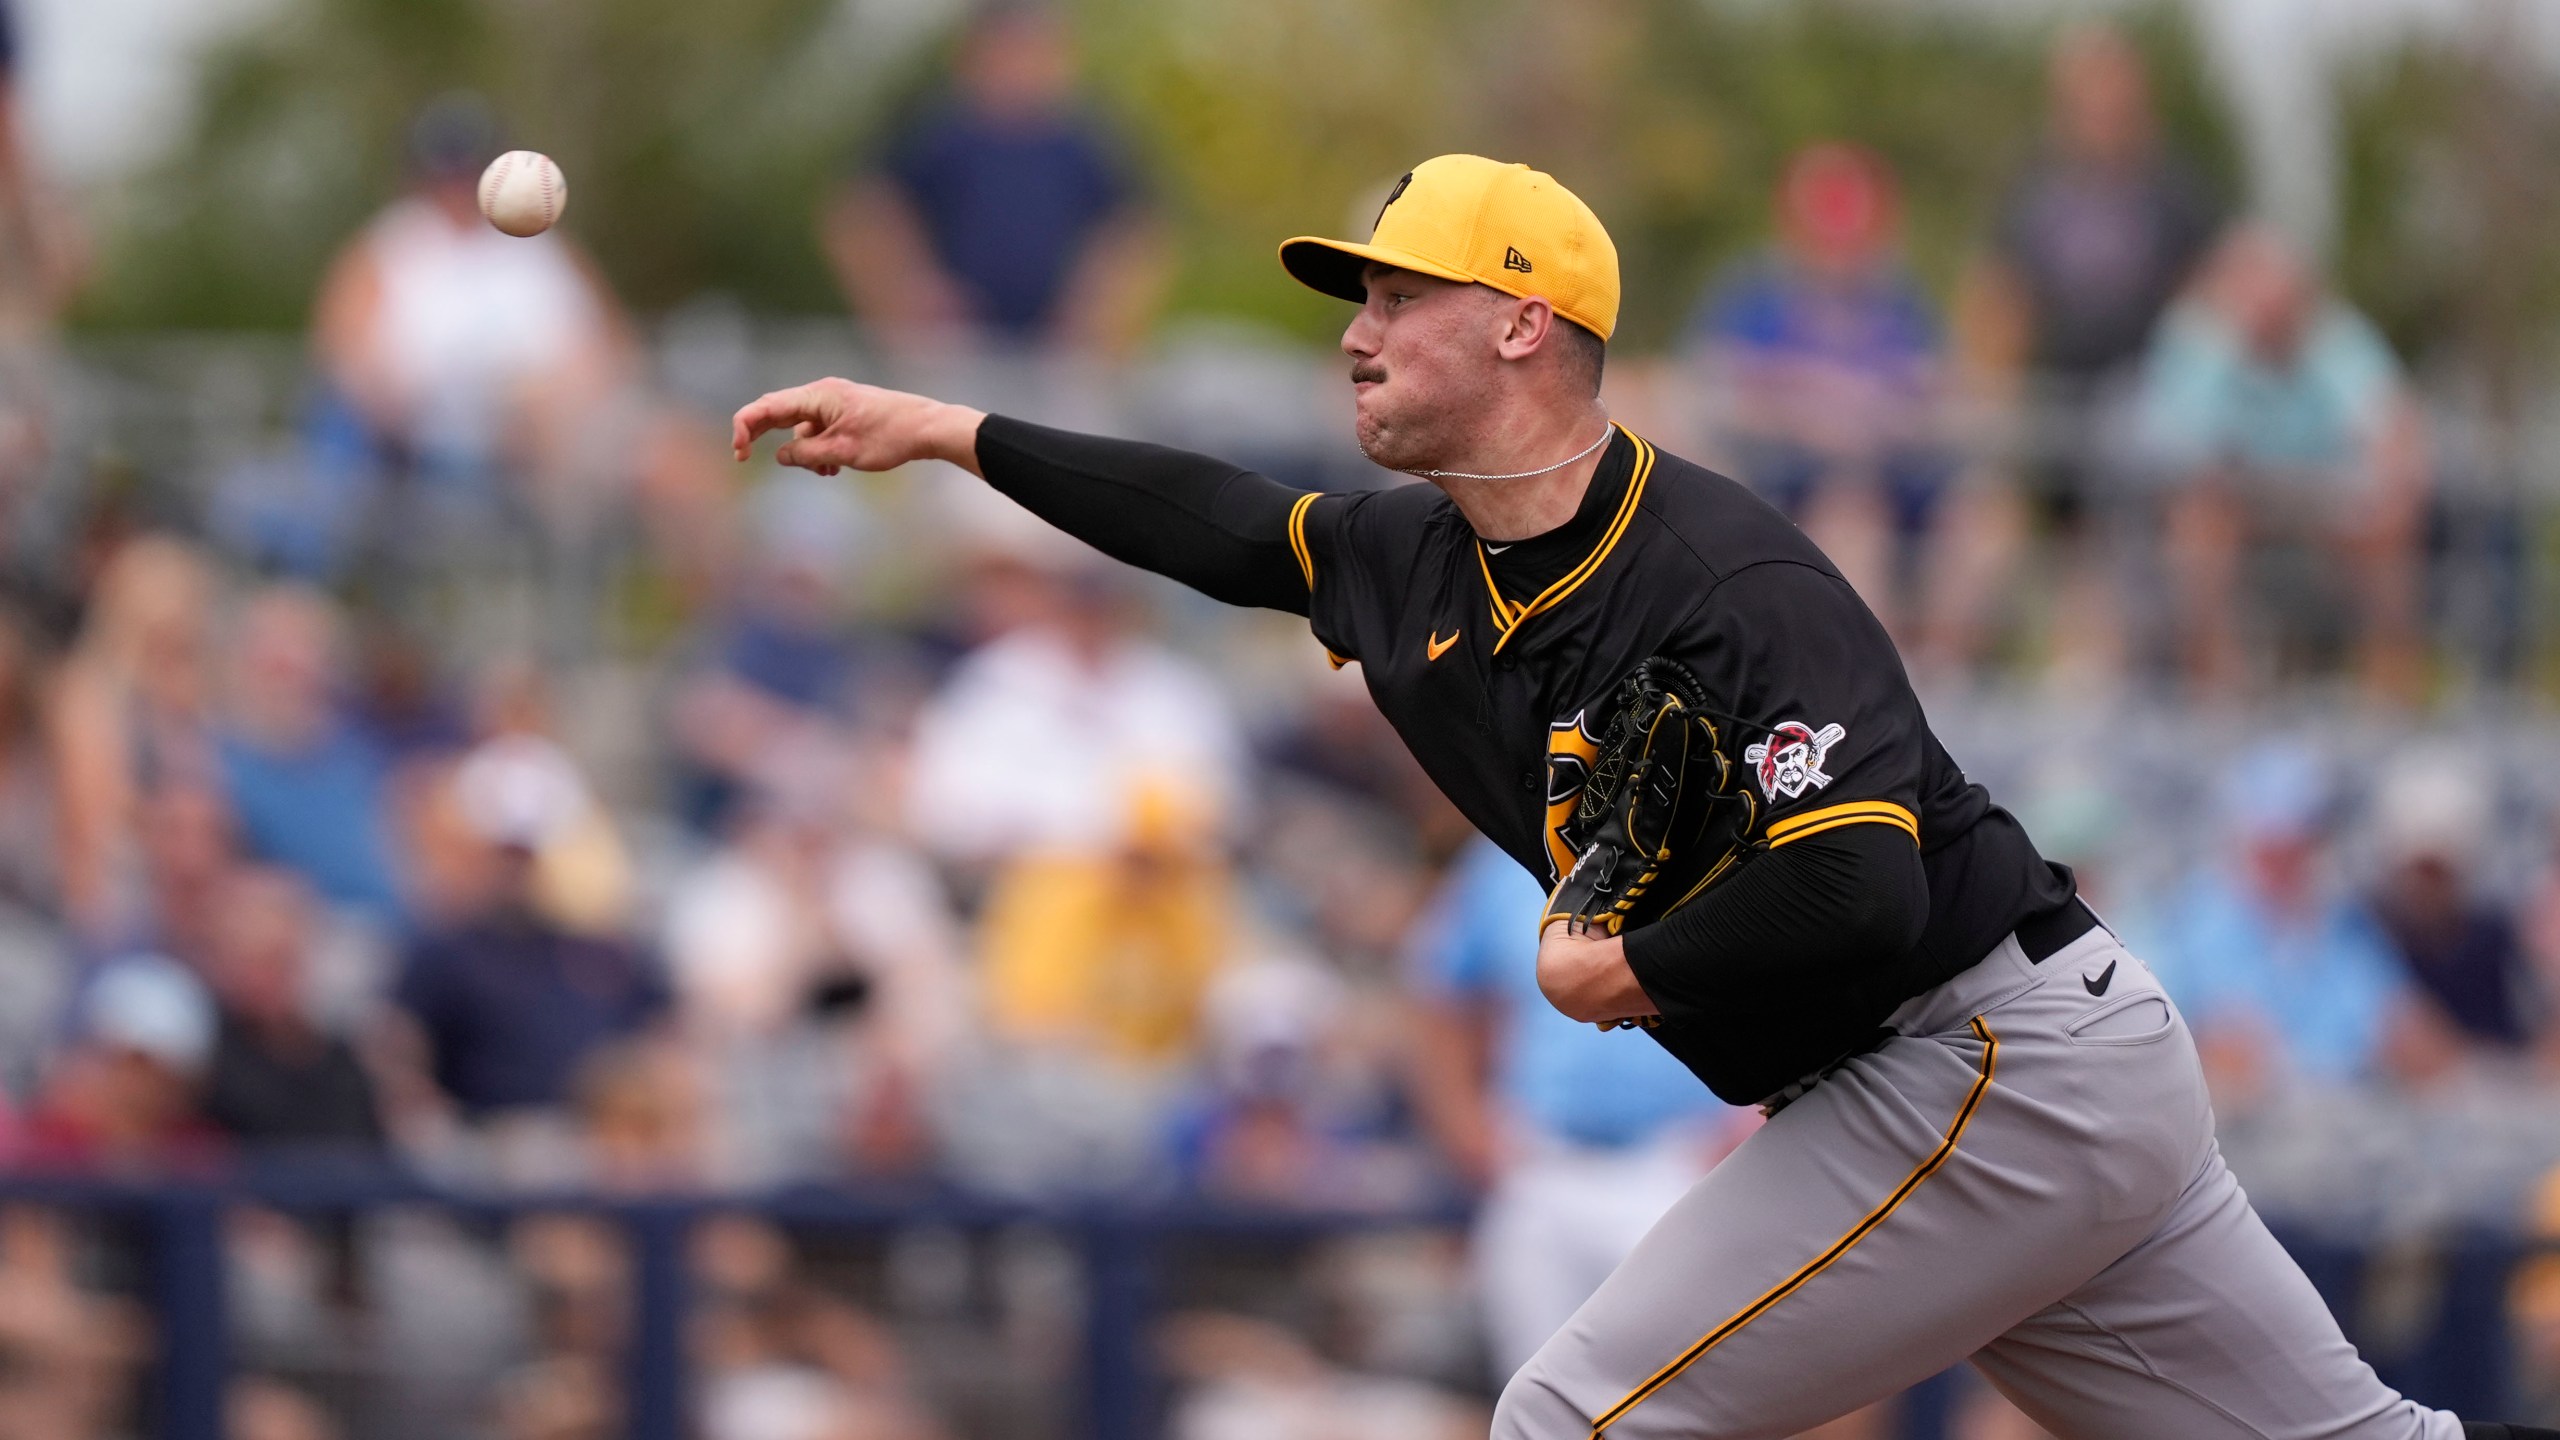 Pittsburgh Pirates pitcher Paul Skenes throws the pitch that resulted in a solo home run by Tampa Bay Rays Amed Rosario in the fourth inning of a spring training baseball game in Port Charlotte, Fla., Monday, March 4, 2024. (AP Photo/Gerald Herbert)